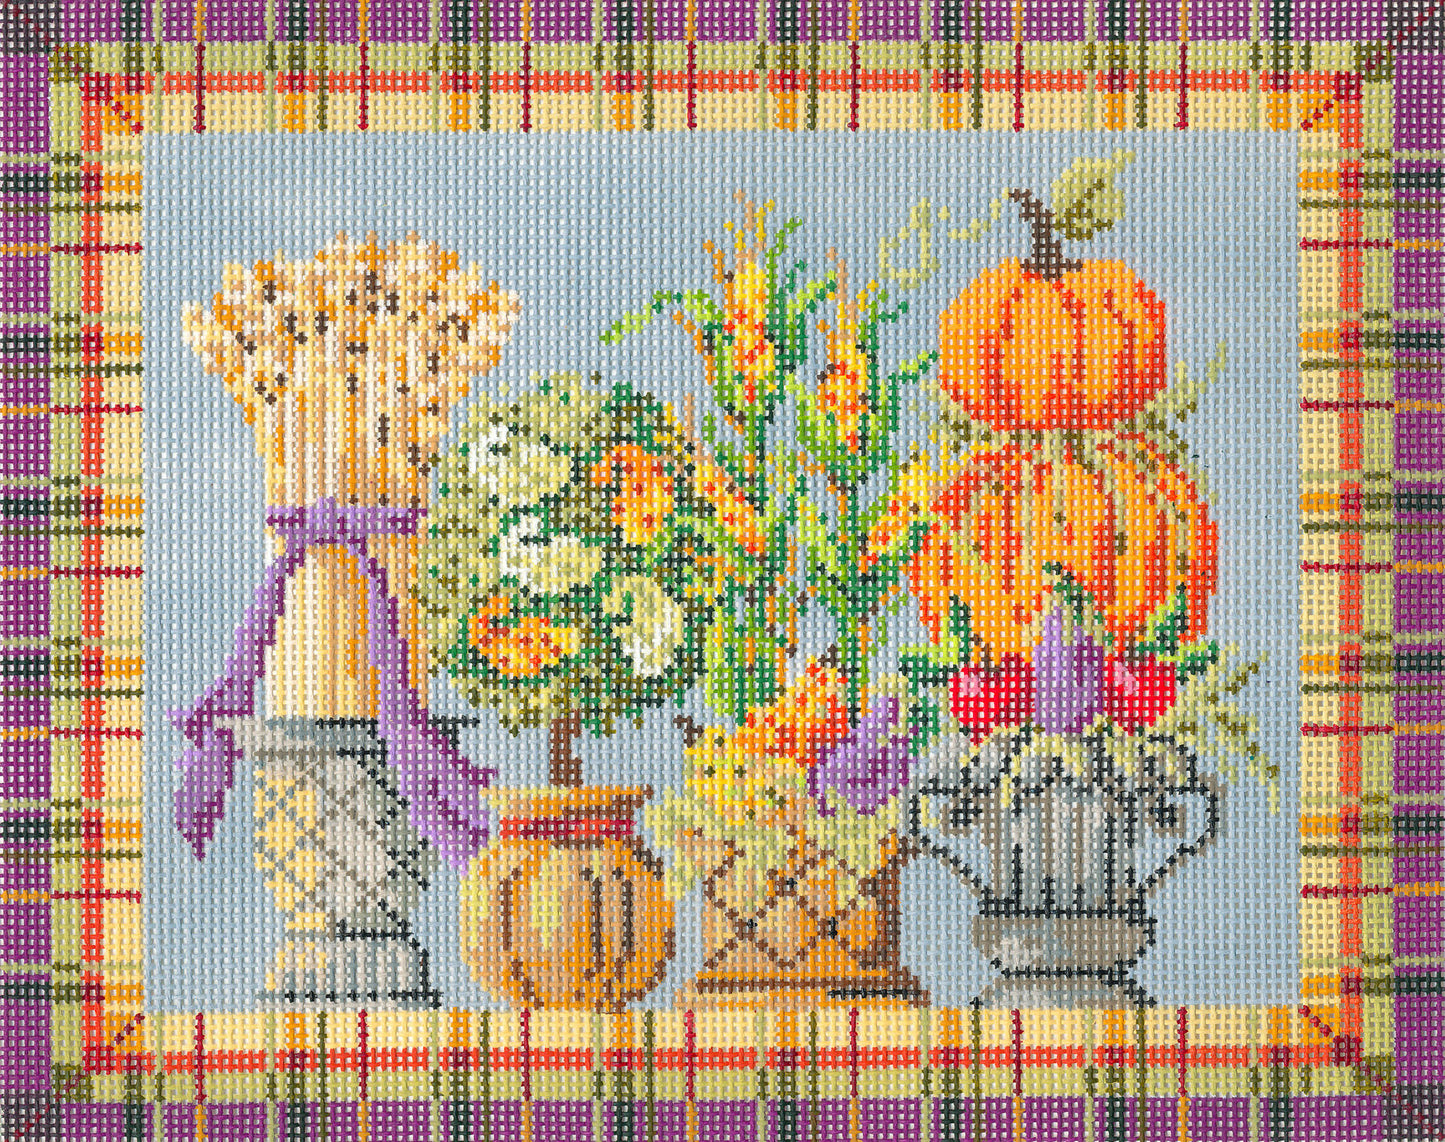 Kelly Clark Canvas – Autumn Topiaries Canvas & Stitch Guide handpainted Needlepoint Canvas ** SP. ORDER**